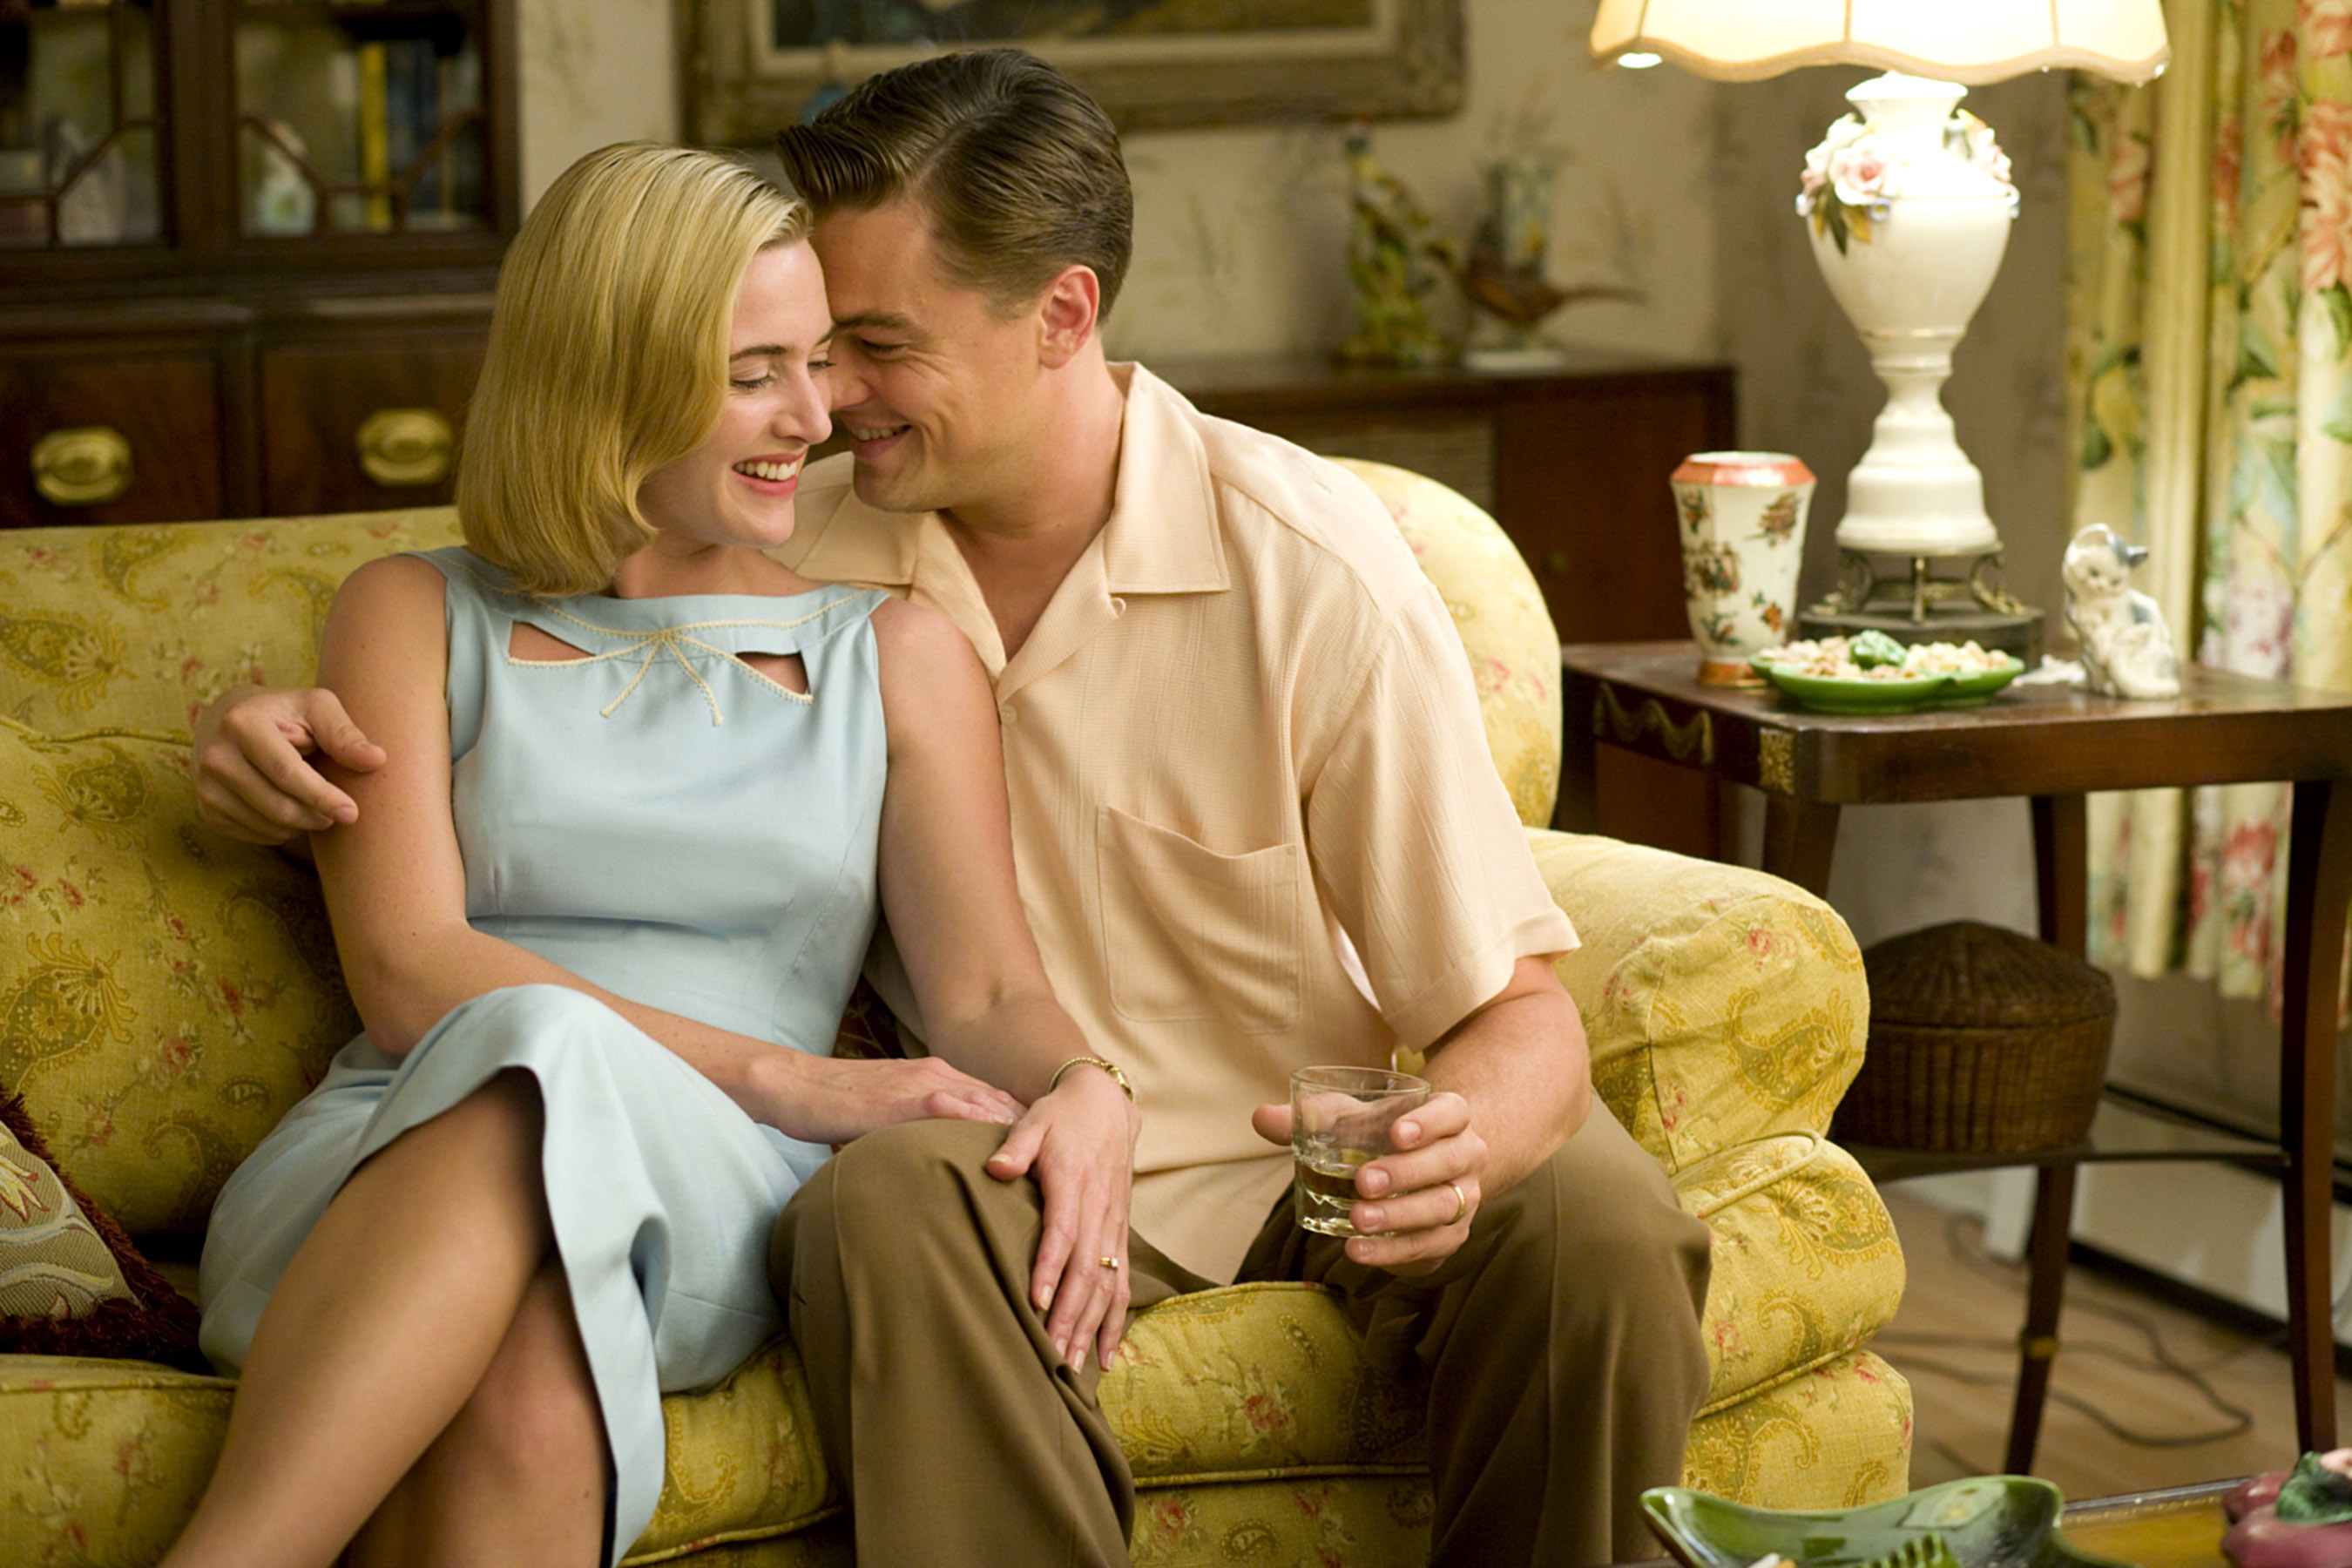 Kate Winslet and Leonardo DiCaprio sit together on a couch